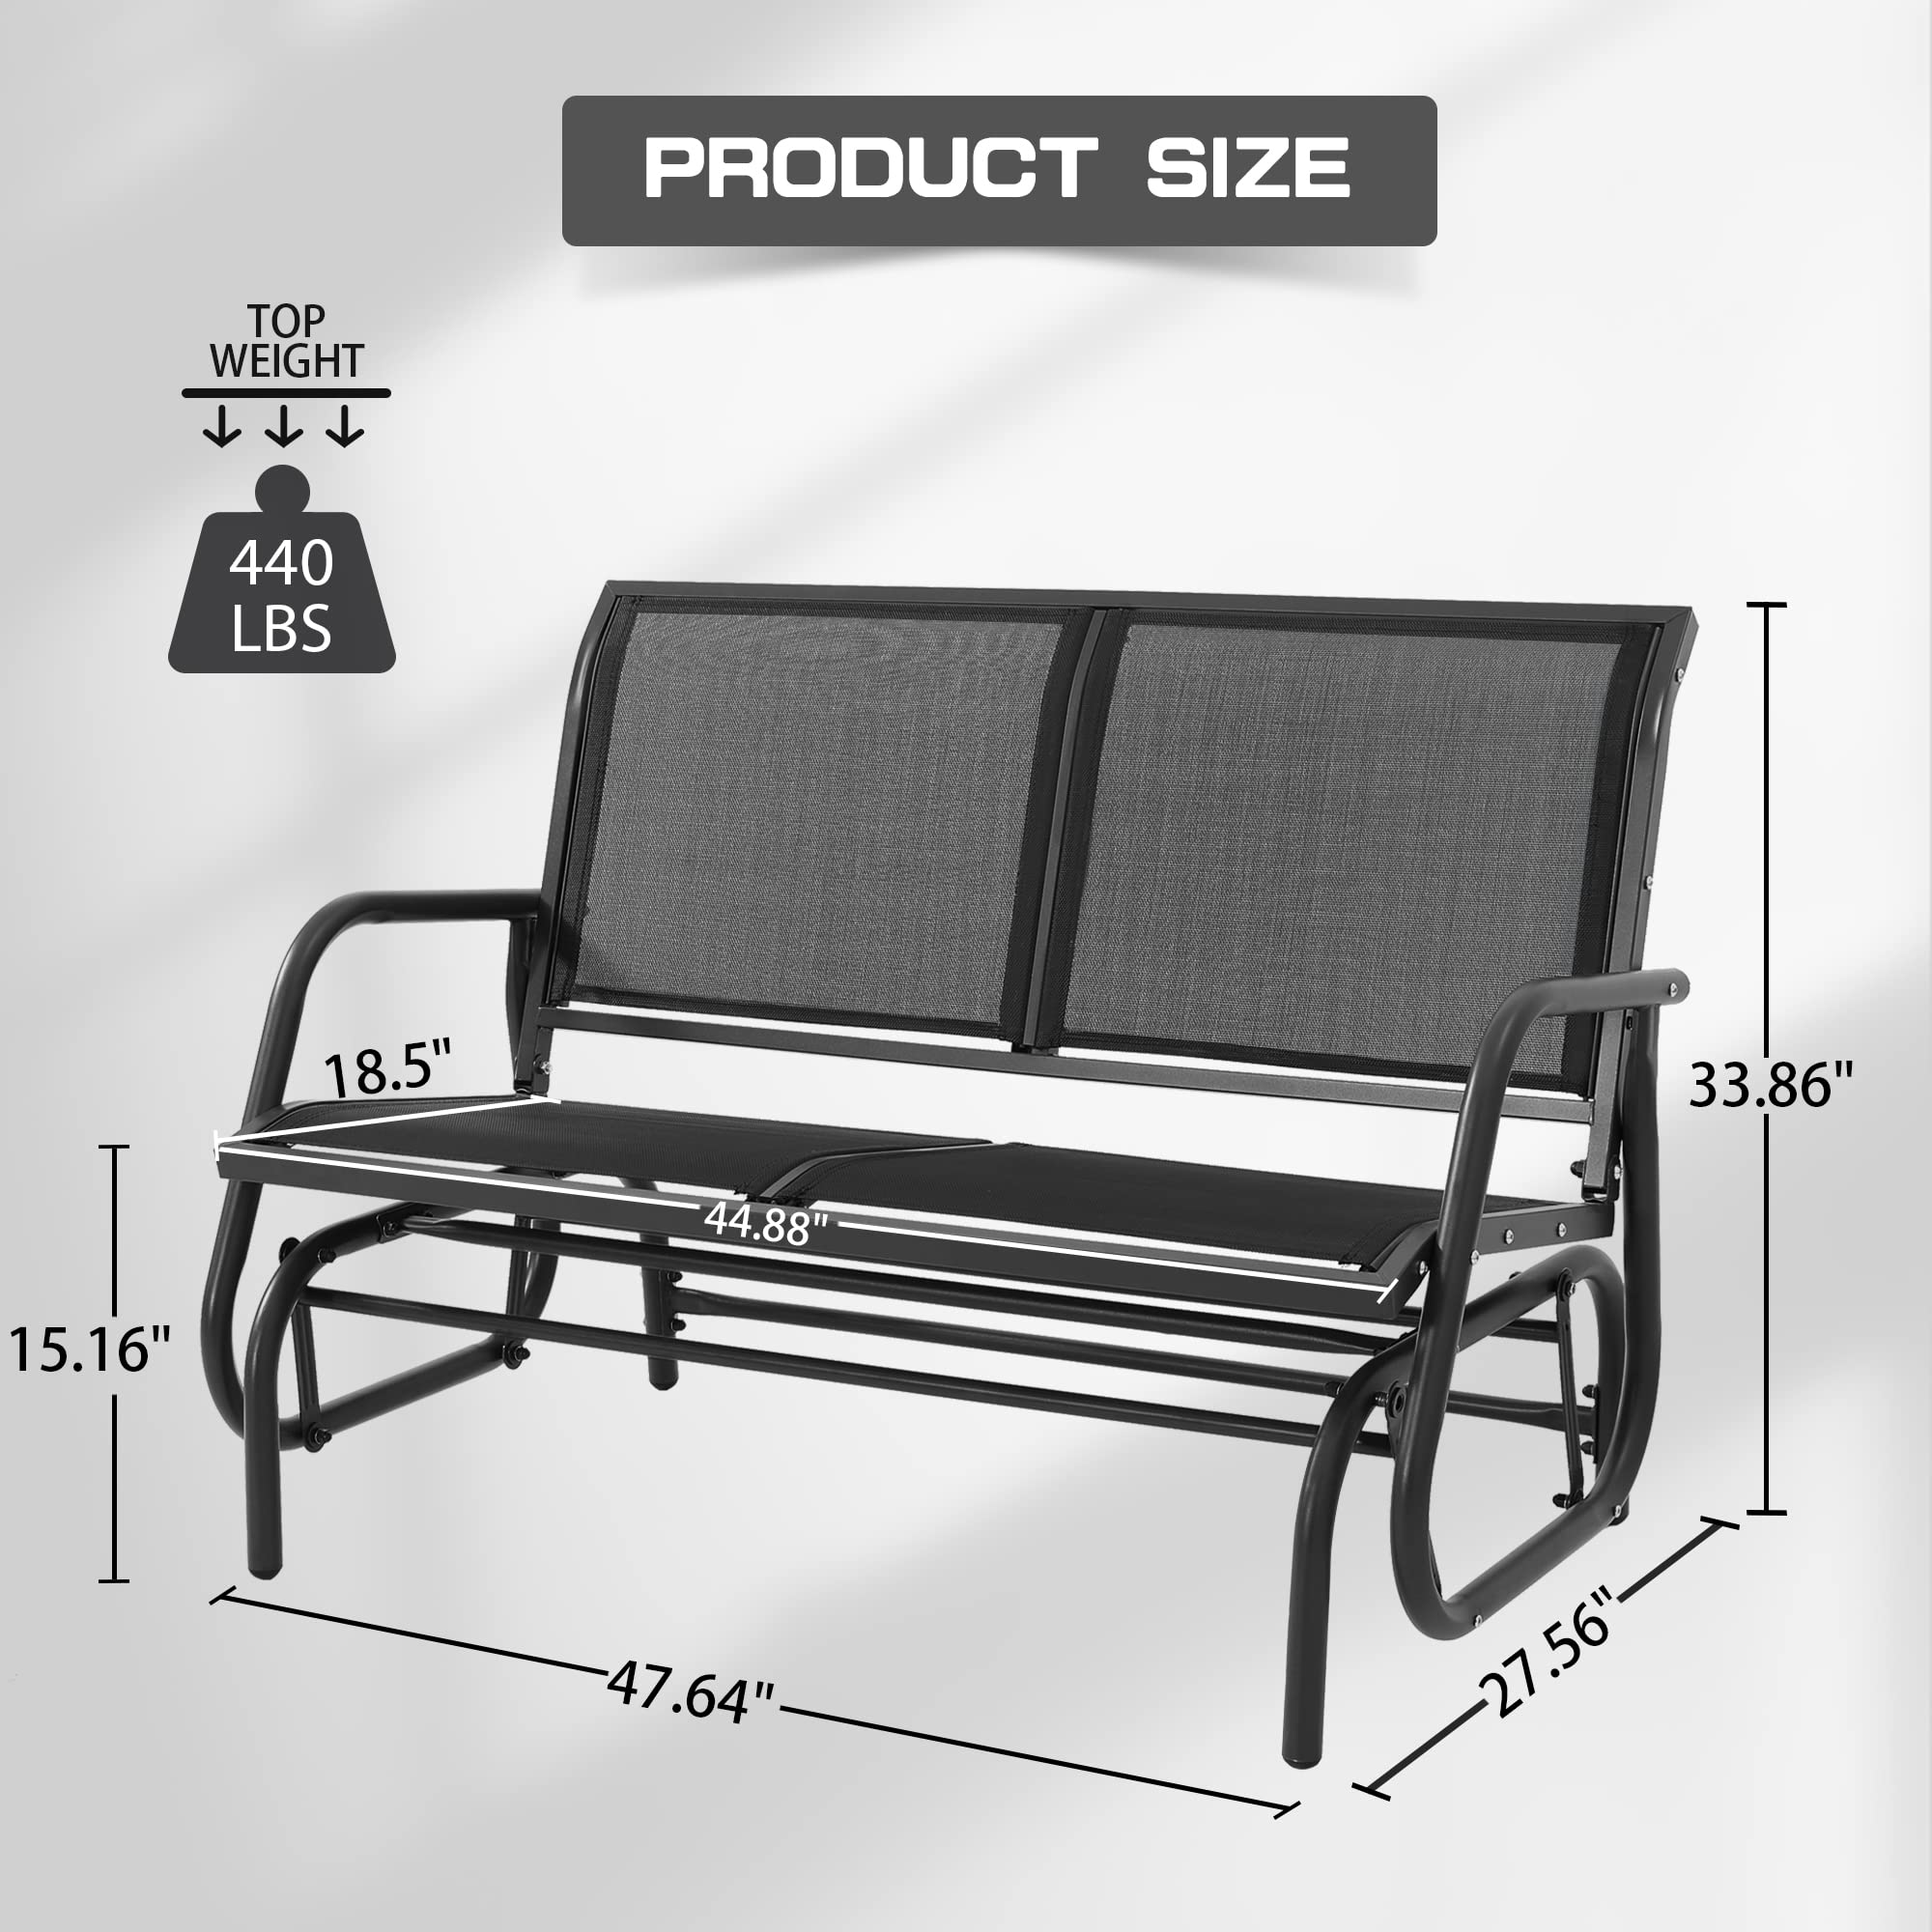 KROFEM Patio Outdoor Glider Bench, High Backrest and Breathable Mesh Fabric, Yard Porch Loveseat, Outside Rocking Swing Chair, Heavy Duty Metal, Clearance, Black